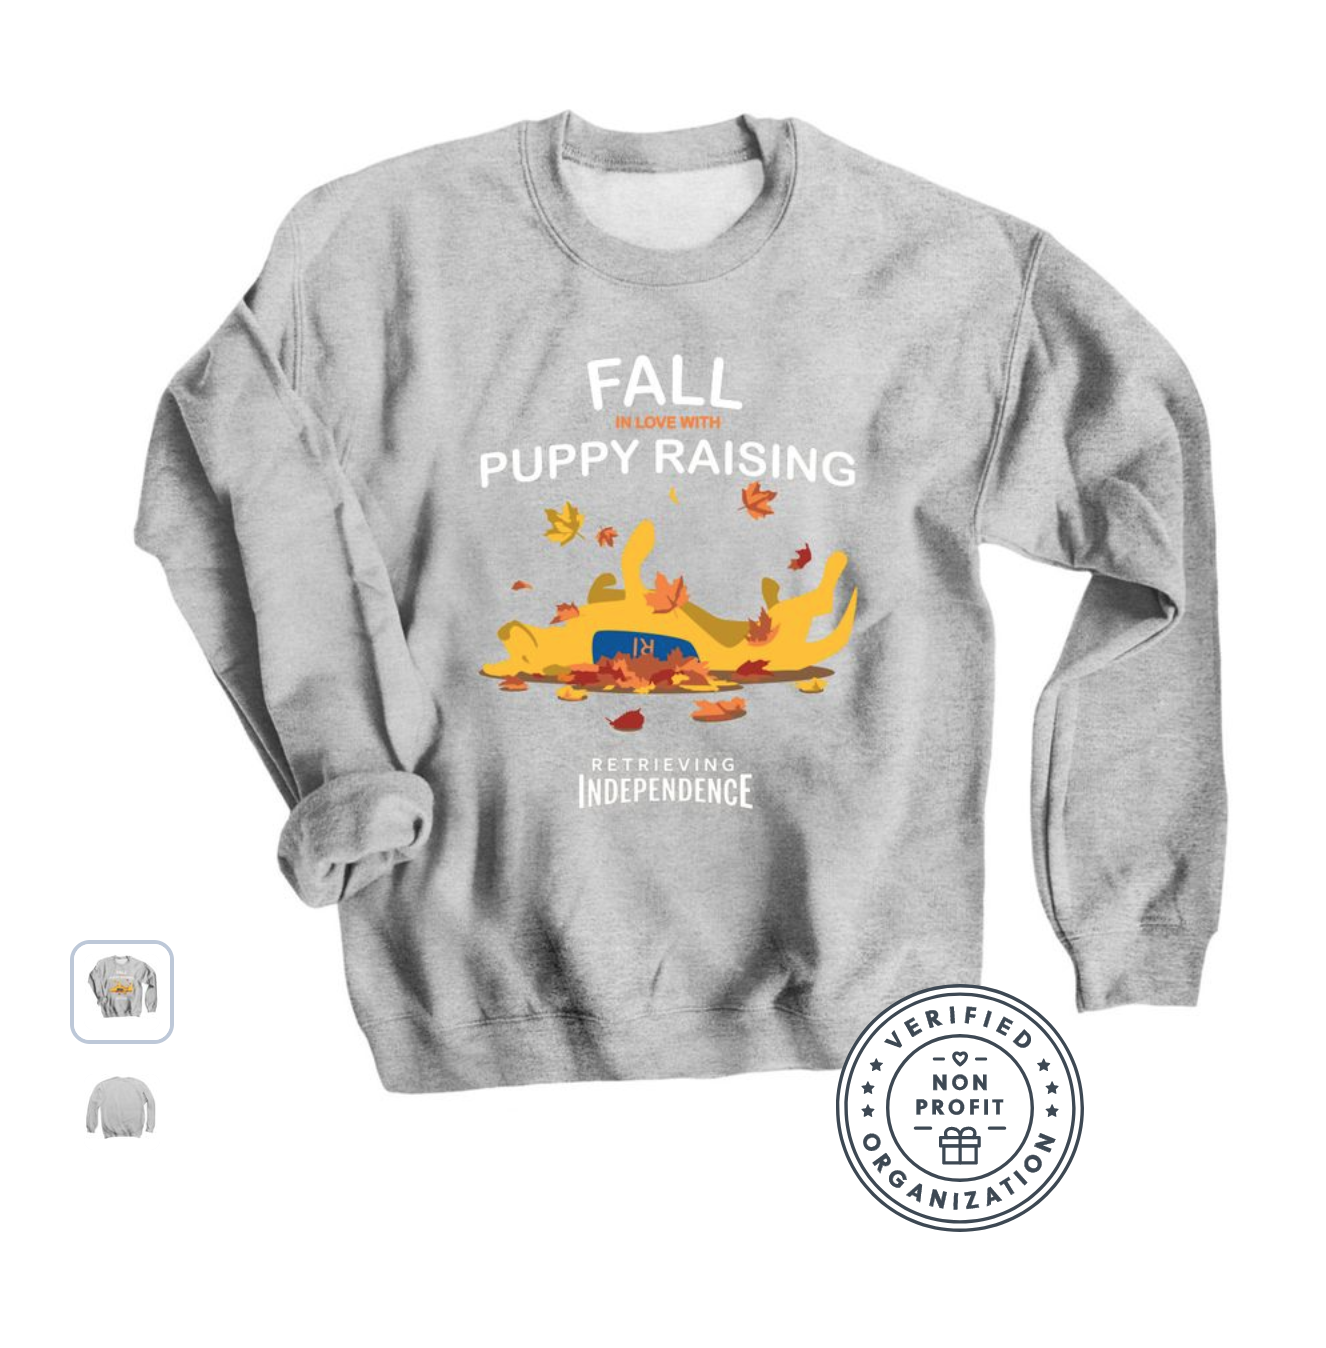 Fall in Love with Puppy Raising Crewneck in Grey